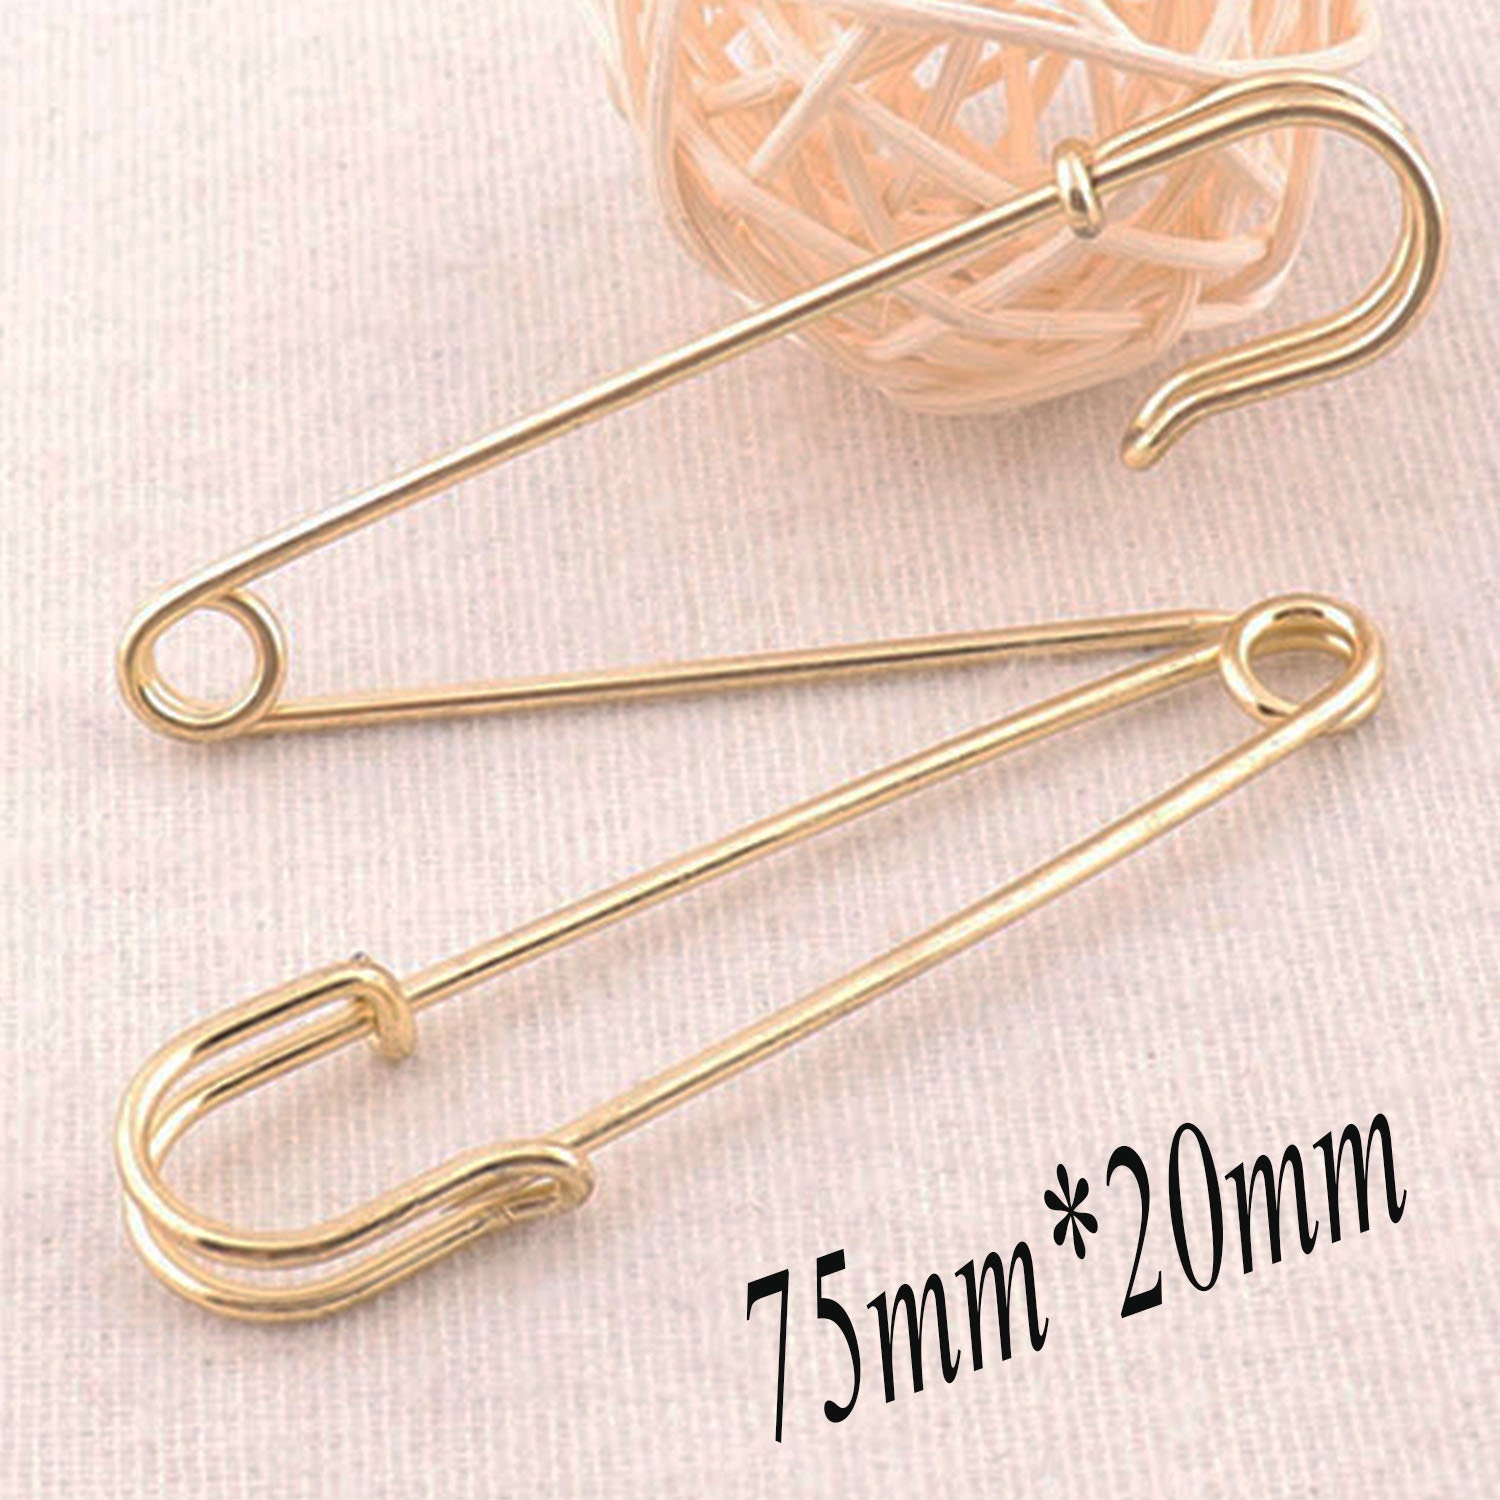 20 PCS Antique Bronze/Gold Safety Pins,Metal Safety Pins Stitch Markers  Loops Charms Jewelry Tag Fasteners,Craft Safety Pin Broo - AliExpress